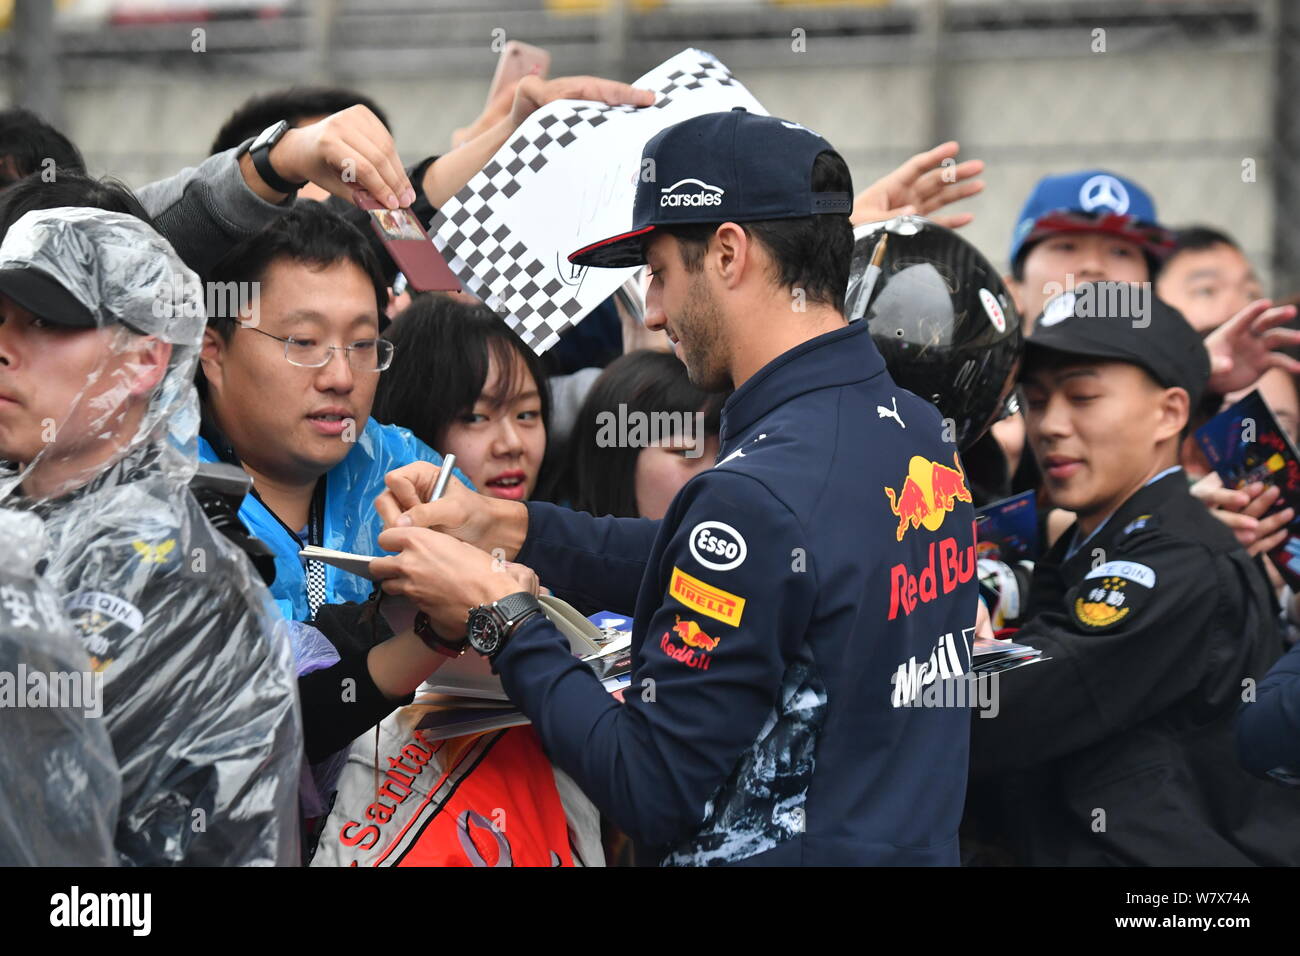 Australian F1 driver Daniel Ricciardo of Red Bull Racing signs autographs  for fans during a fan meeting event before the 2017 Formula One Chinese  Gran Stock Photo - Alamy